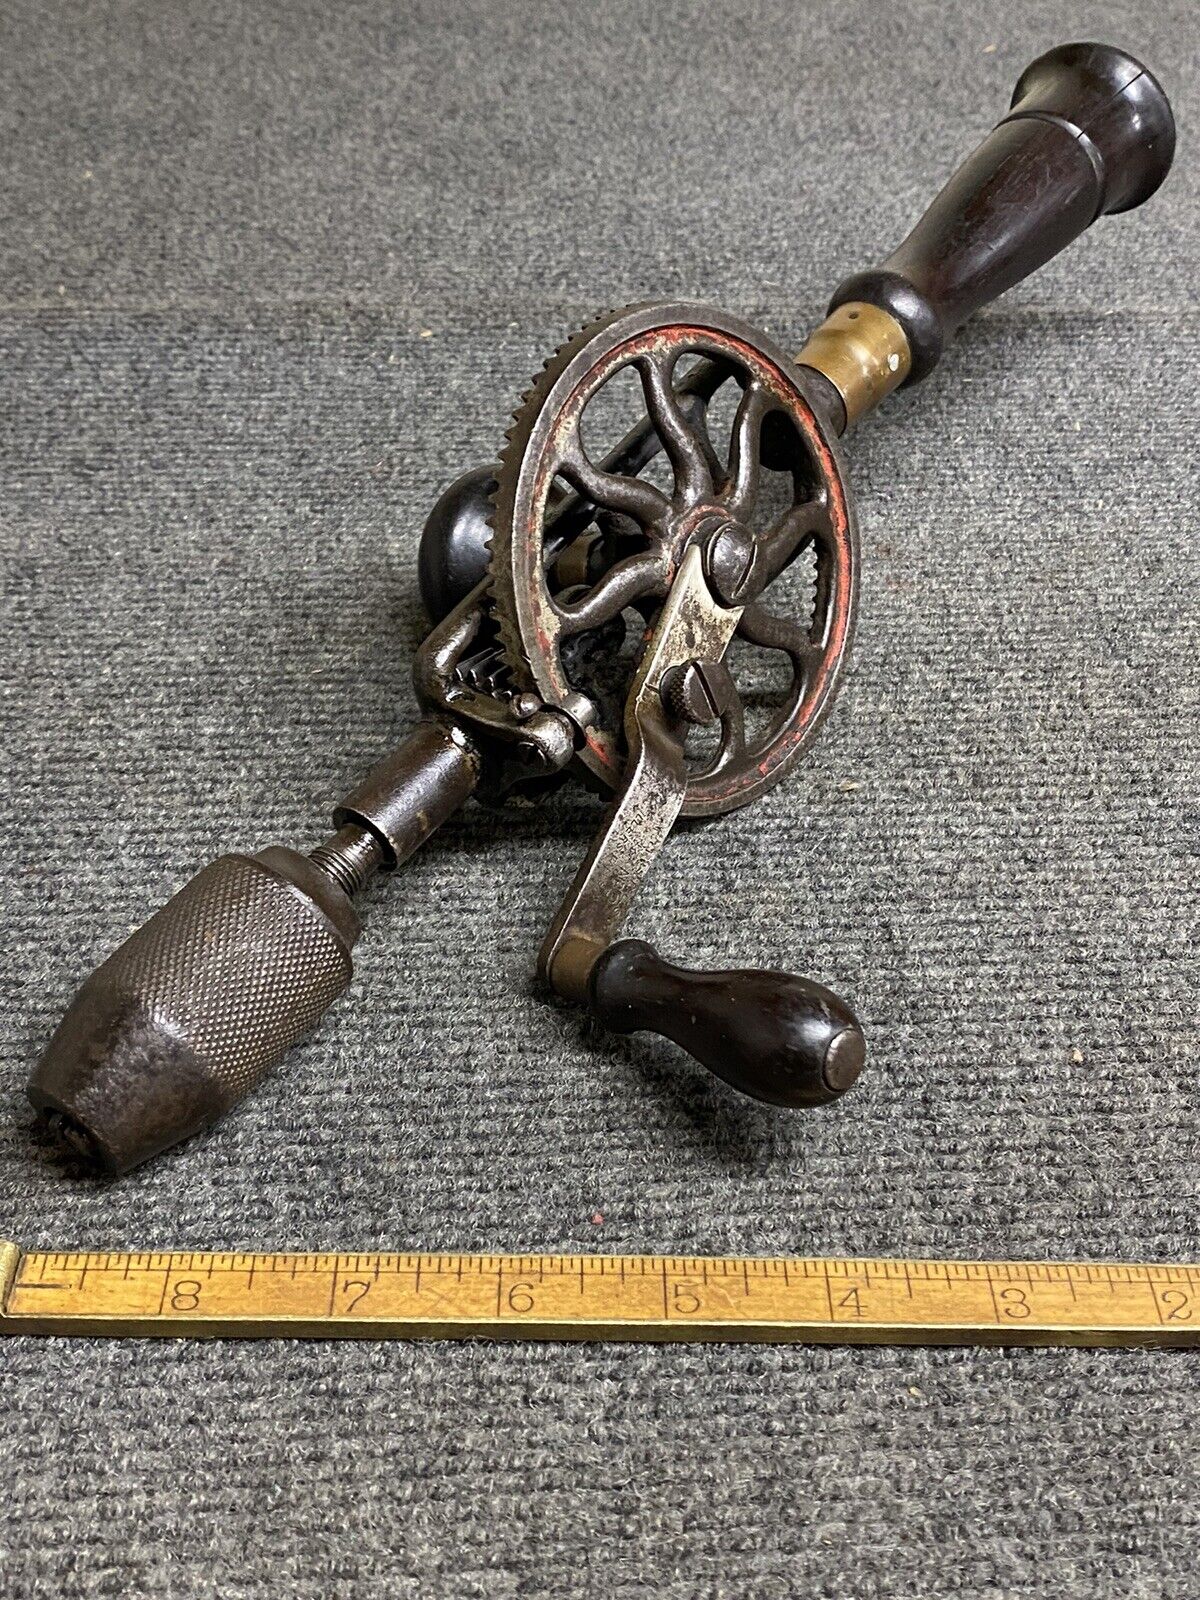 Early Vintage Miller Falls No. 2 Egg Beater Hand Drill All Original USA